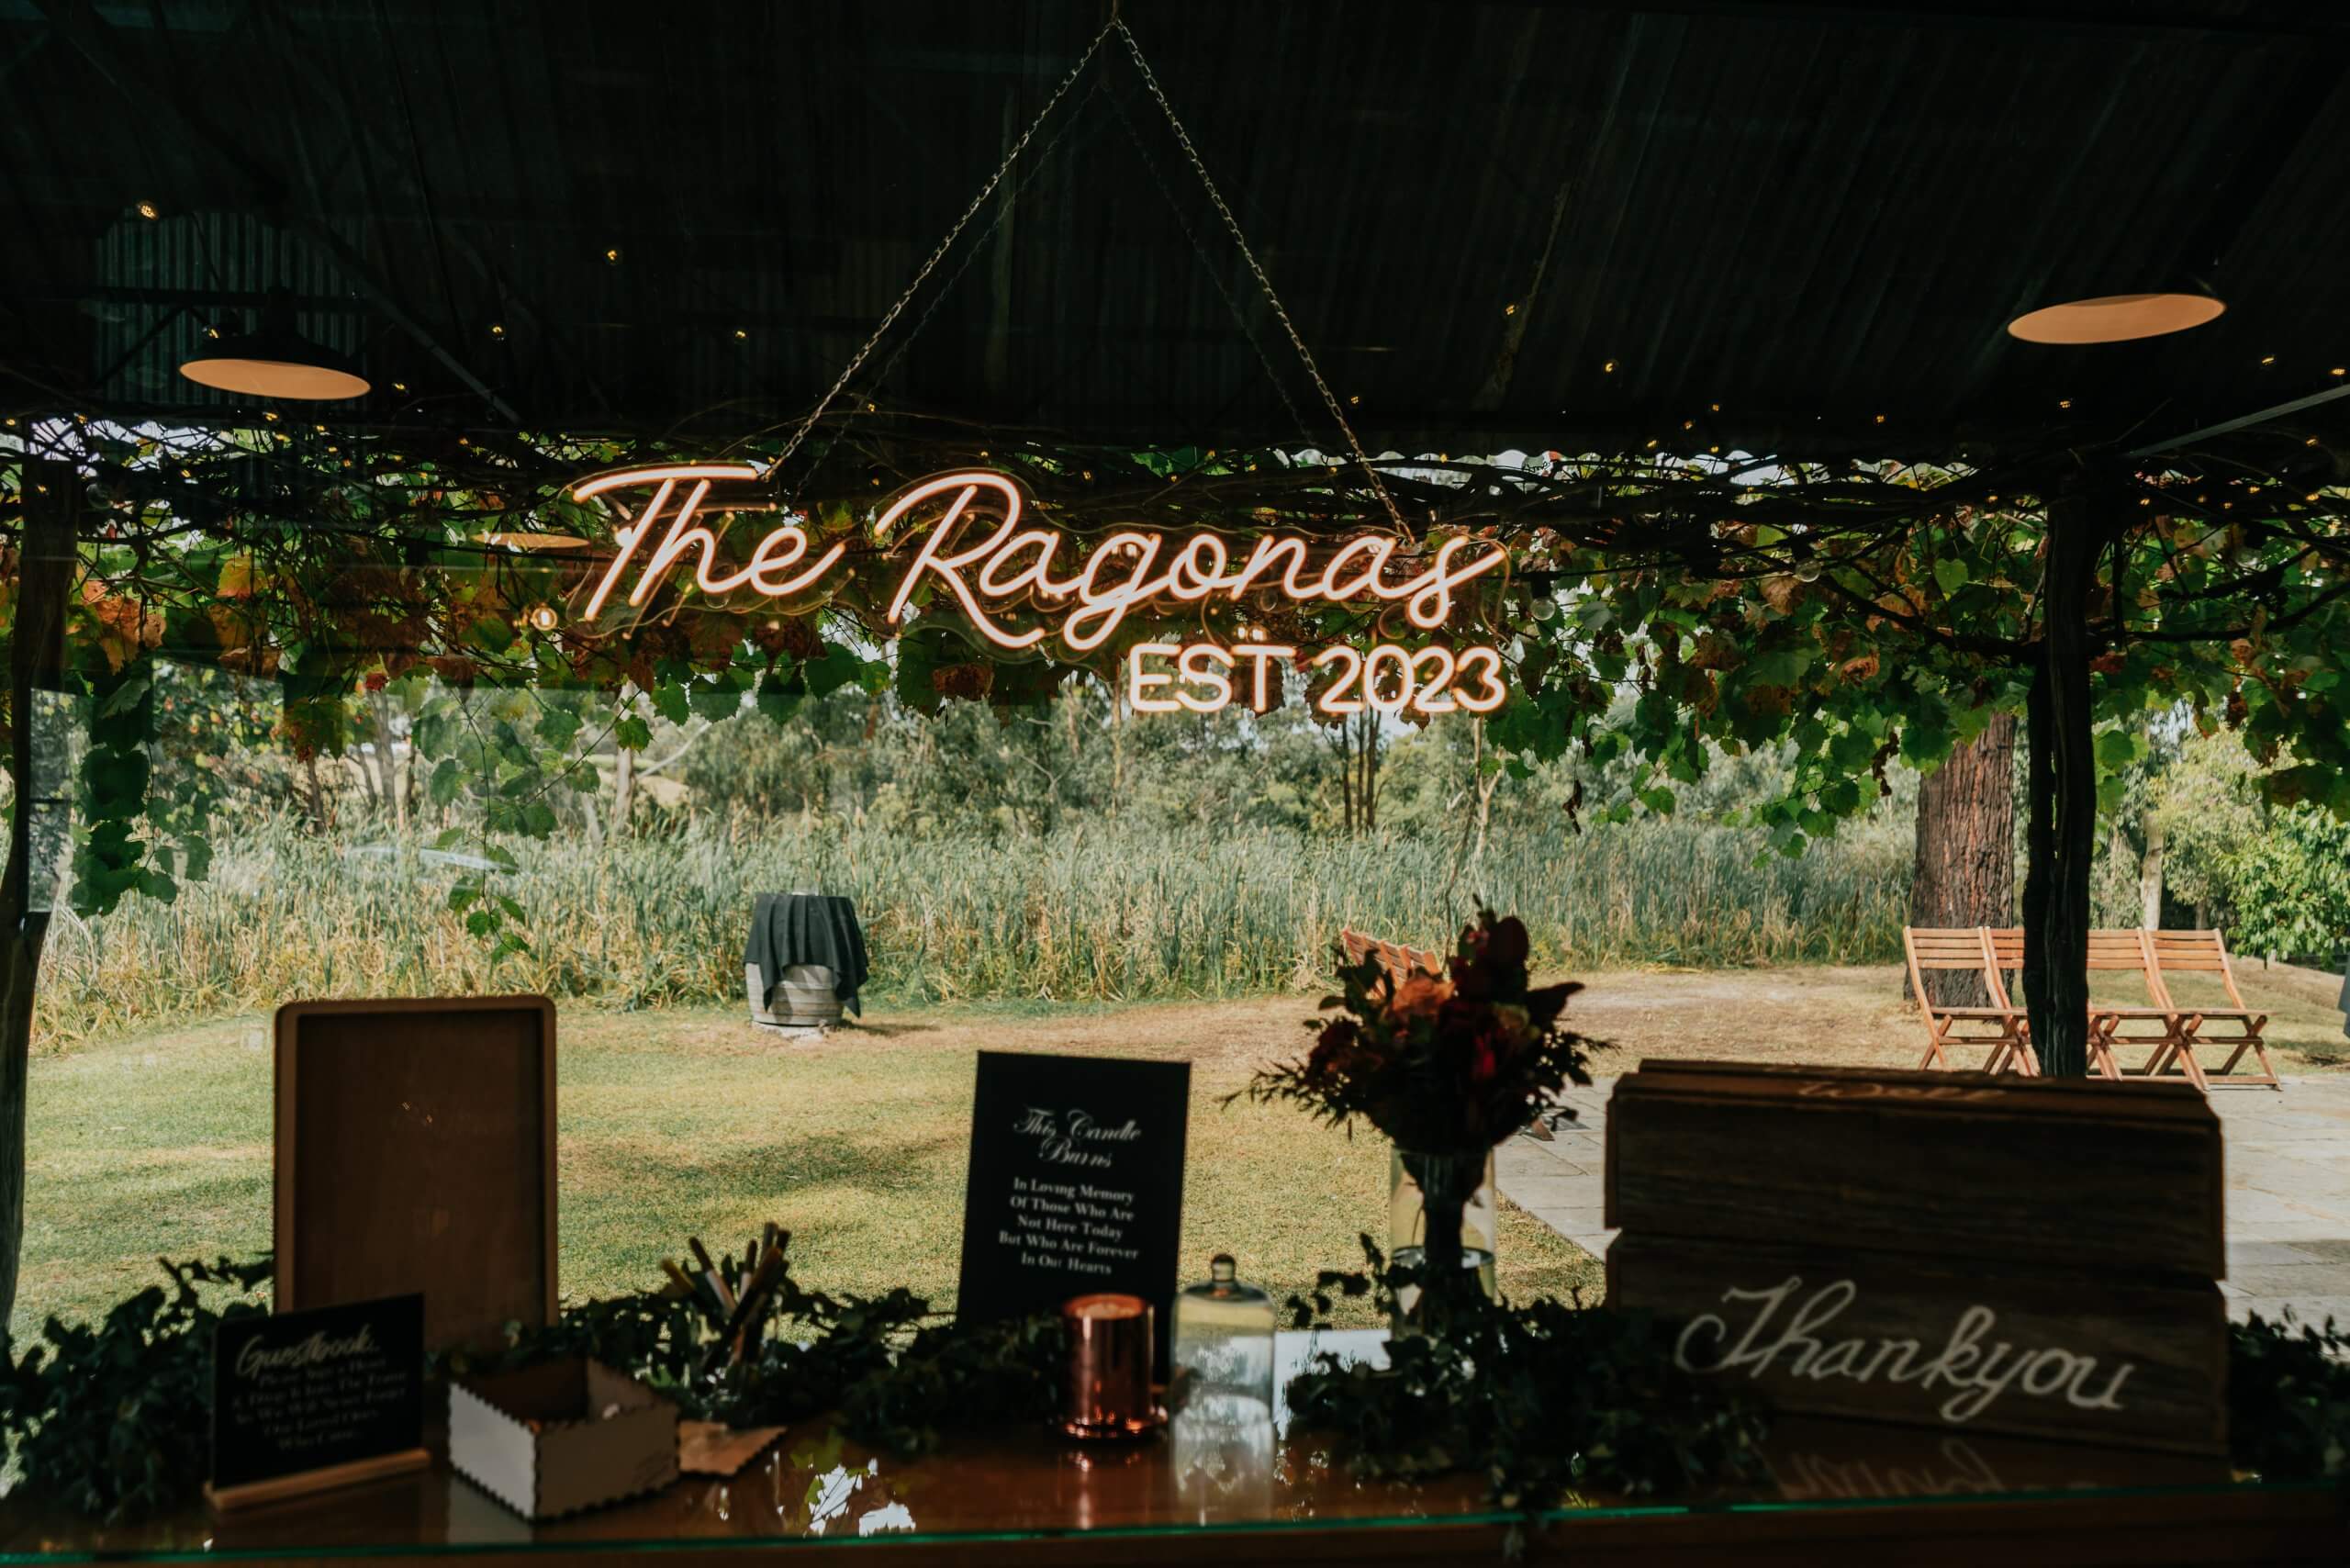 Customise Your Wedding - 'The Ragonas est 2023' sign and rustic details for a wedding.